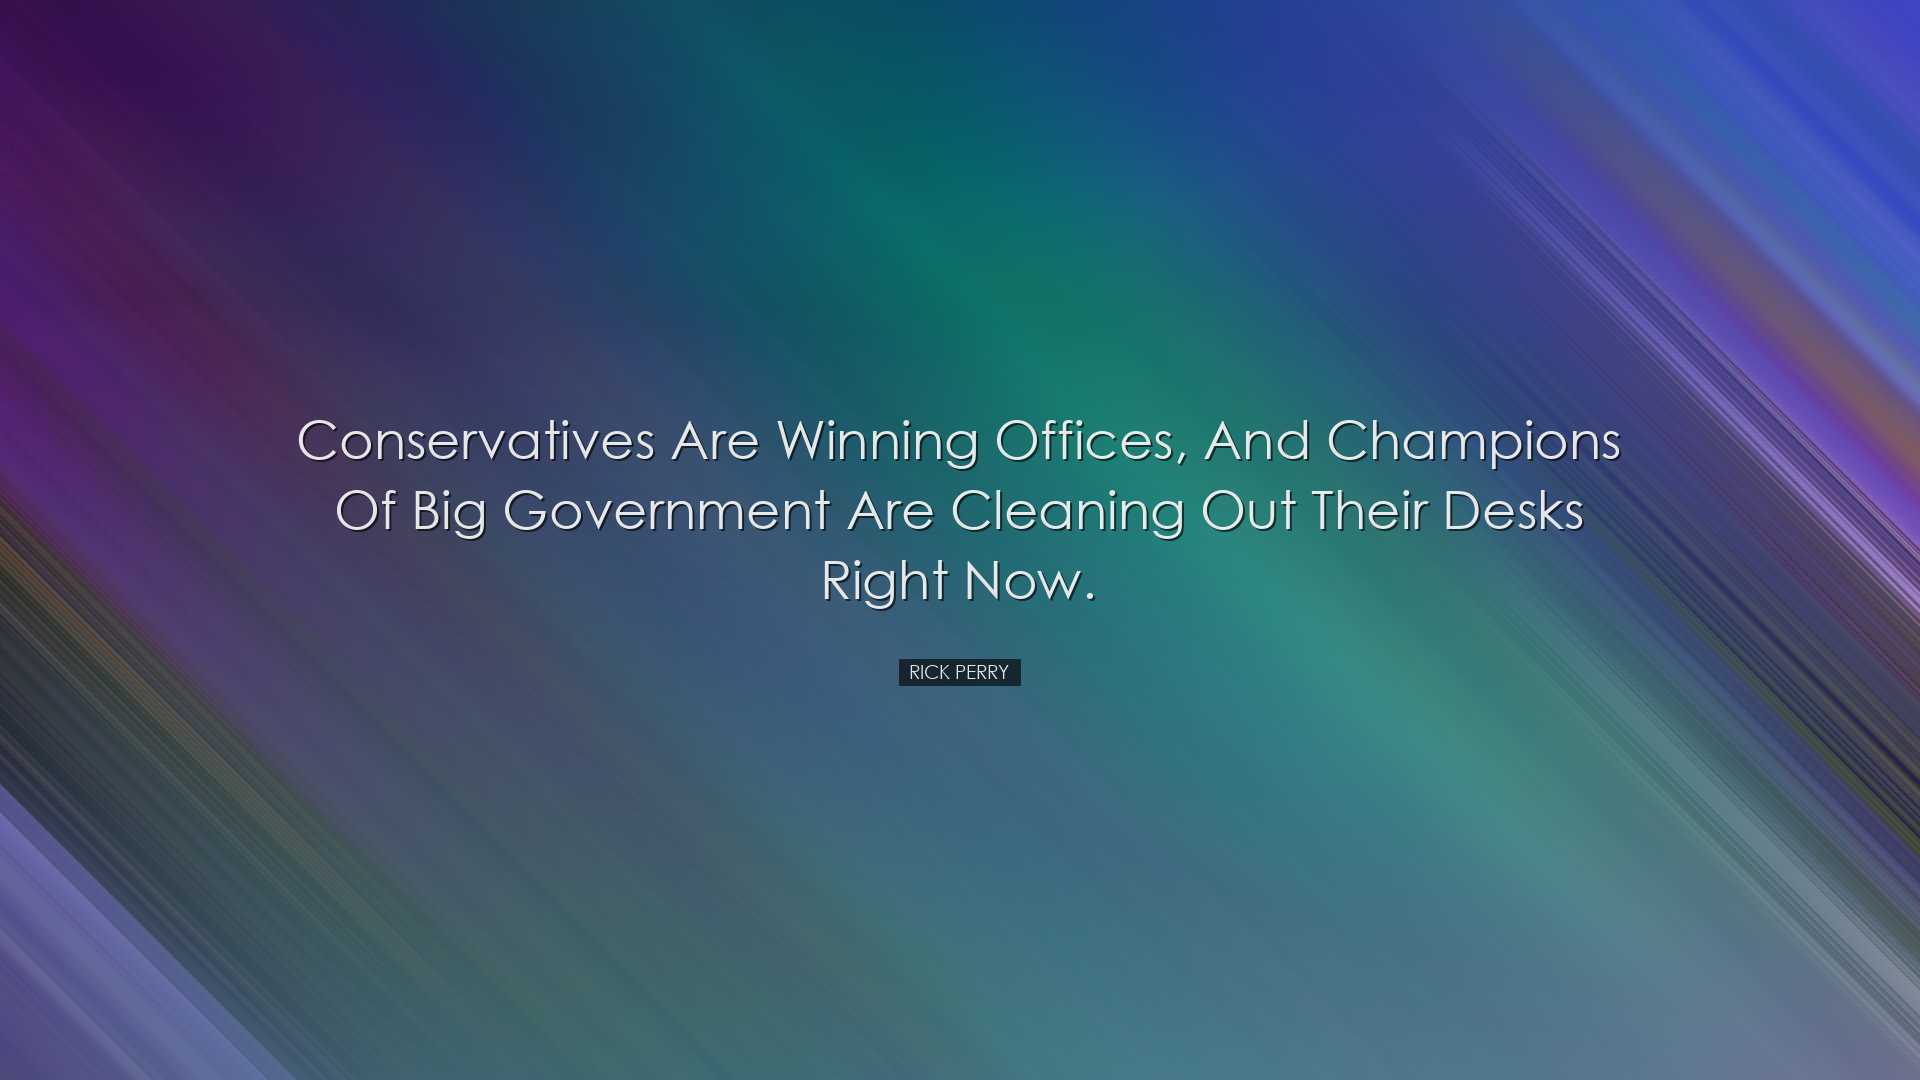 Conservatives are winning offices, and champions of big government